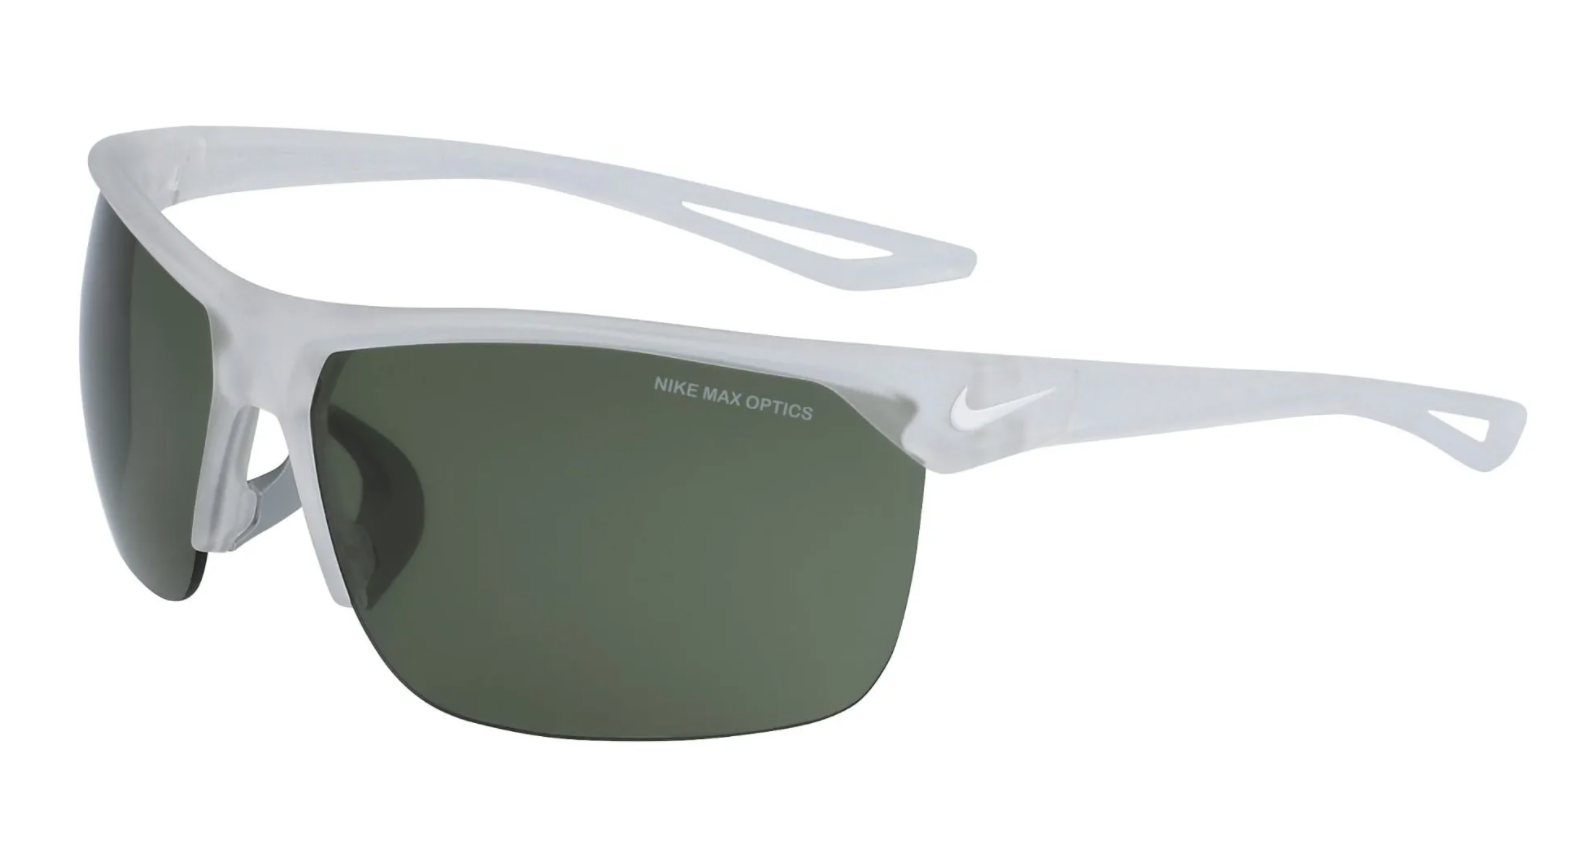 Nike Trainer sunglasses in matte clear/white with green lenses